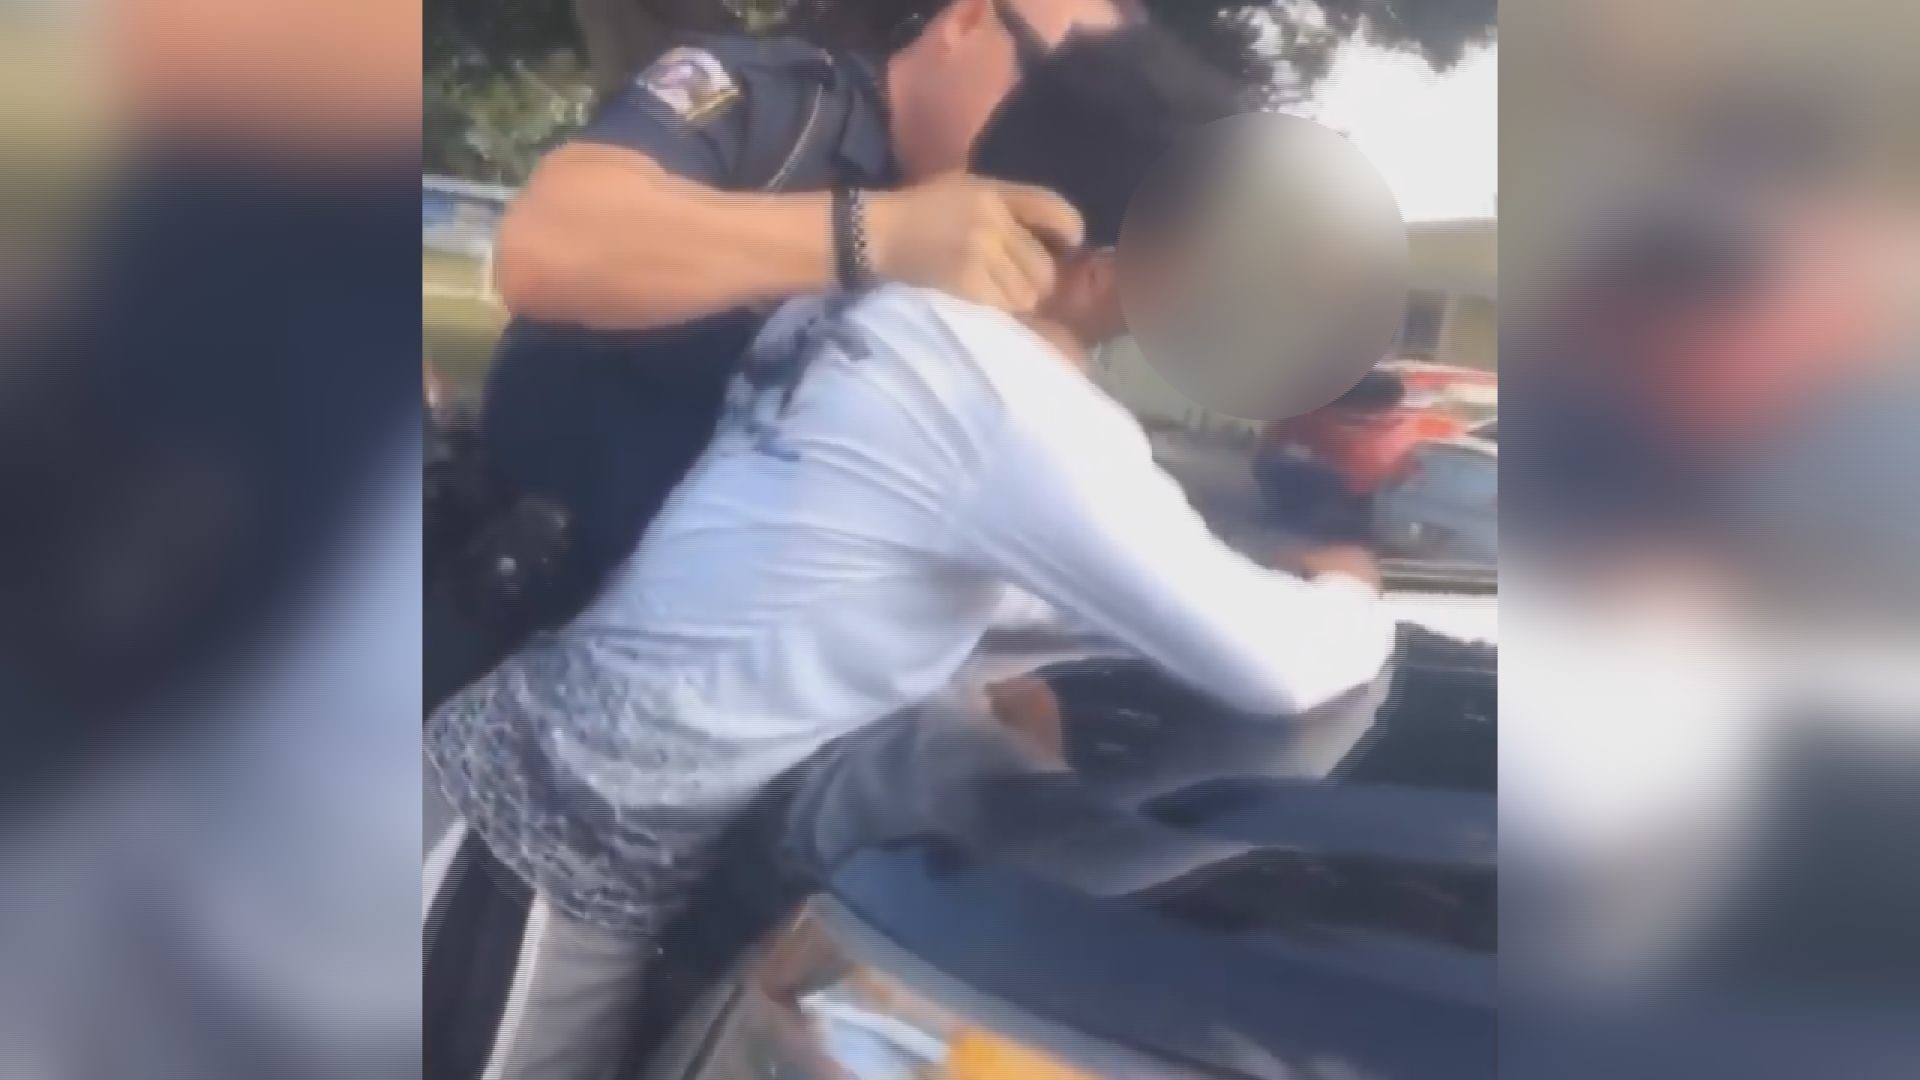 A Largo police officer was fired Tuesday following an internal affairs investigation of video that showed him grabbing a 17-year-old boy by the neck.

According to a case report obtained by 10News, Brian Livernois, 43, was accused of using inappropriate force and violating a policy regarding rude behavior or profane language. Largo Police Chief Jeffrey Undestad said the situation warranted the officer's termination.